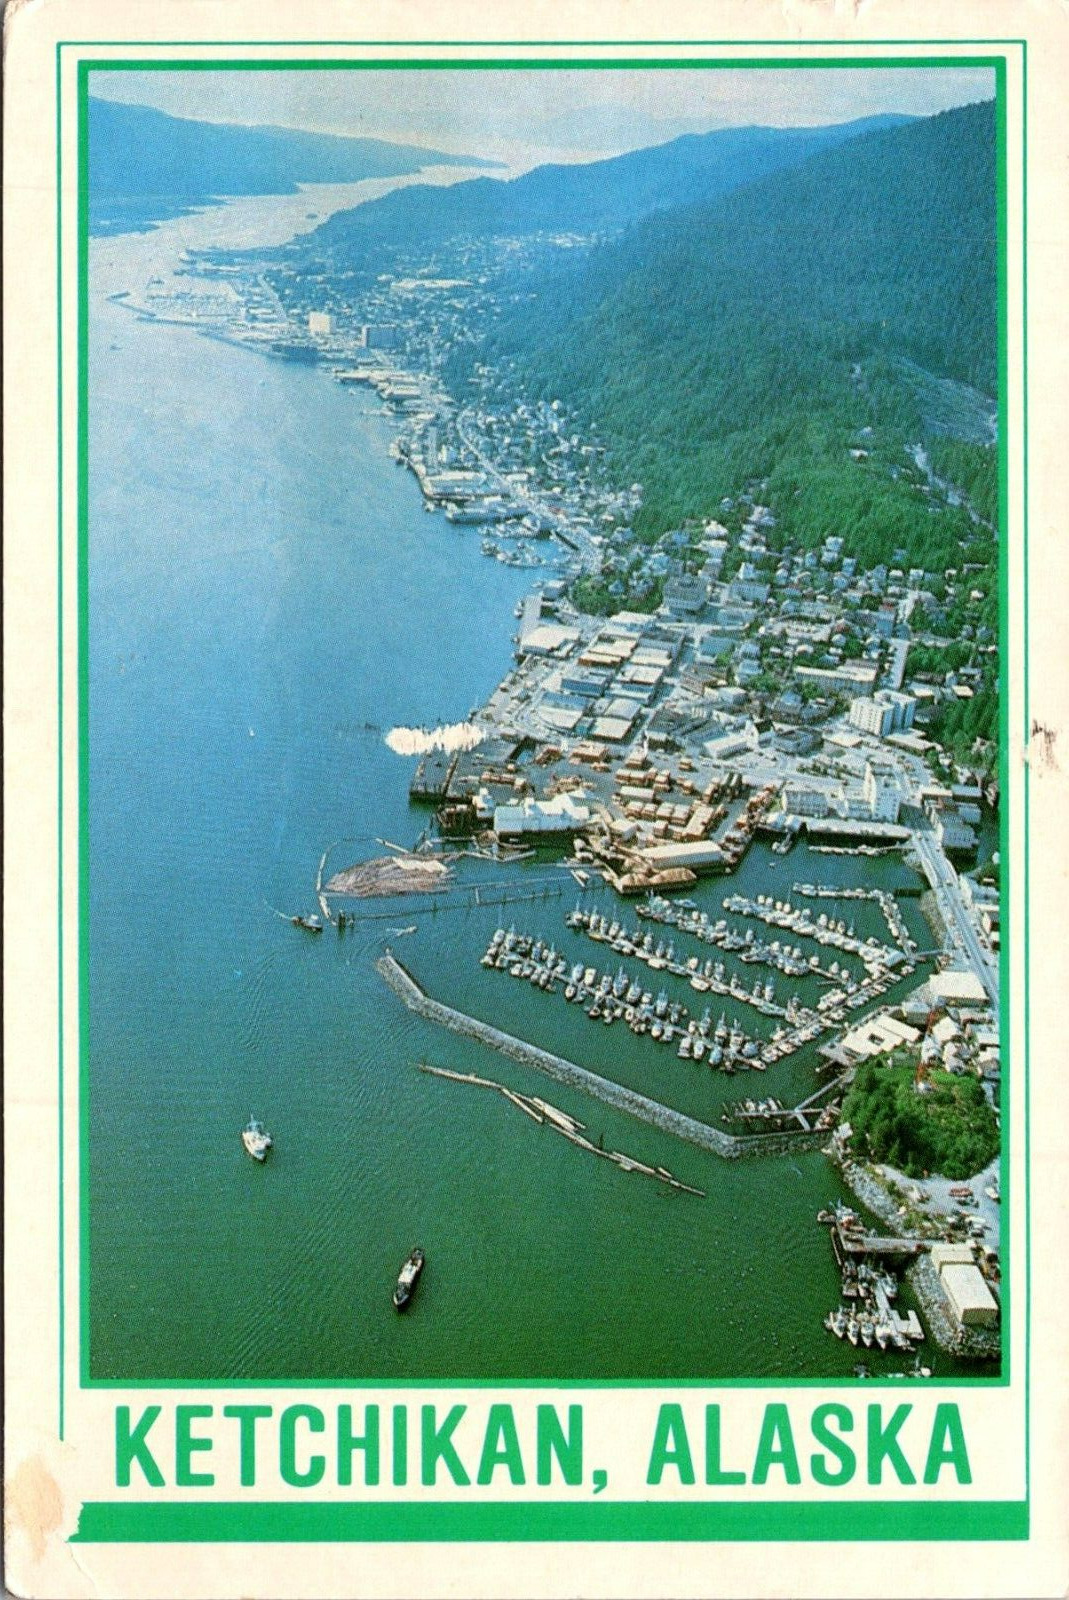 Ketchikan, Alaska Scenic Aerial View Vintage Postcard With Boats On The Water